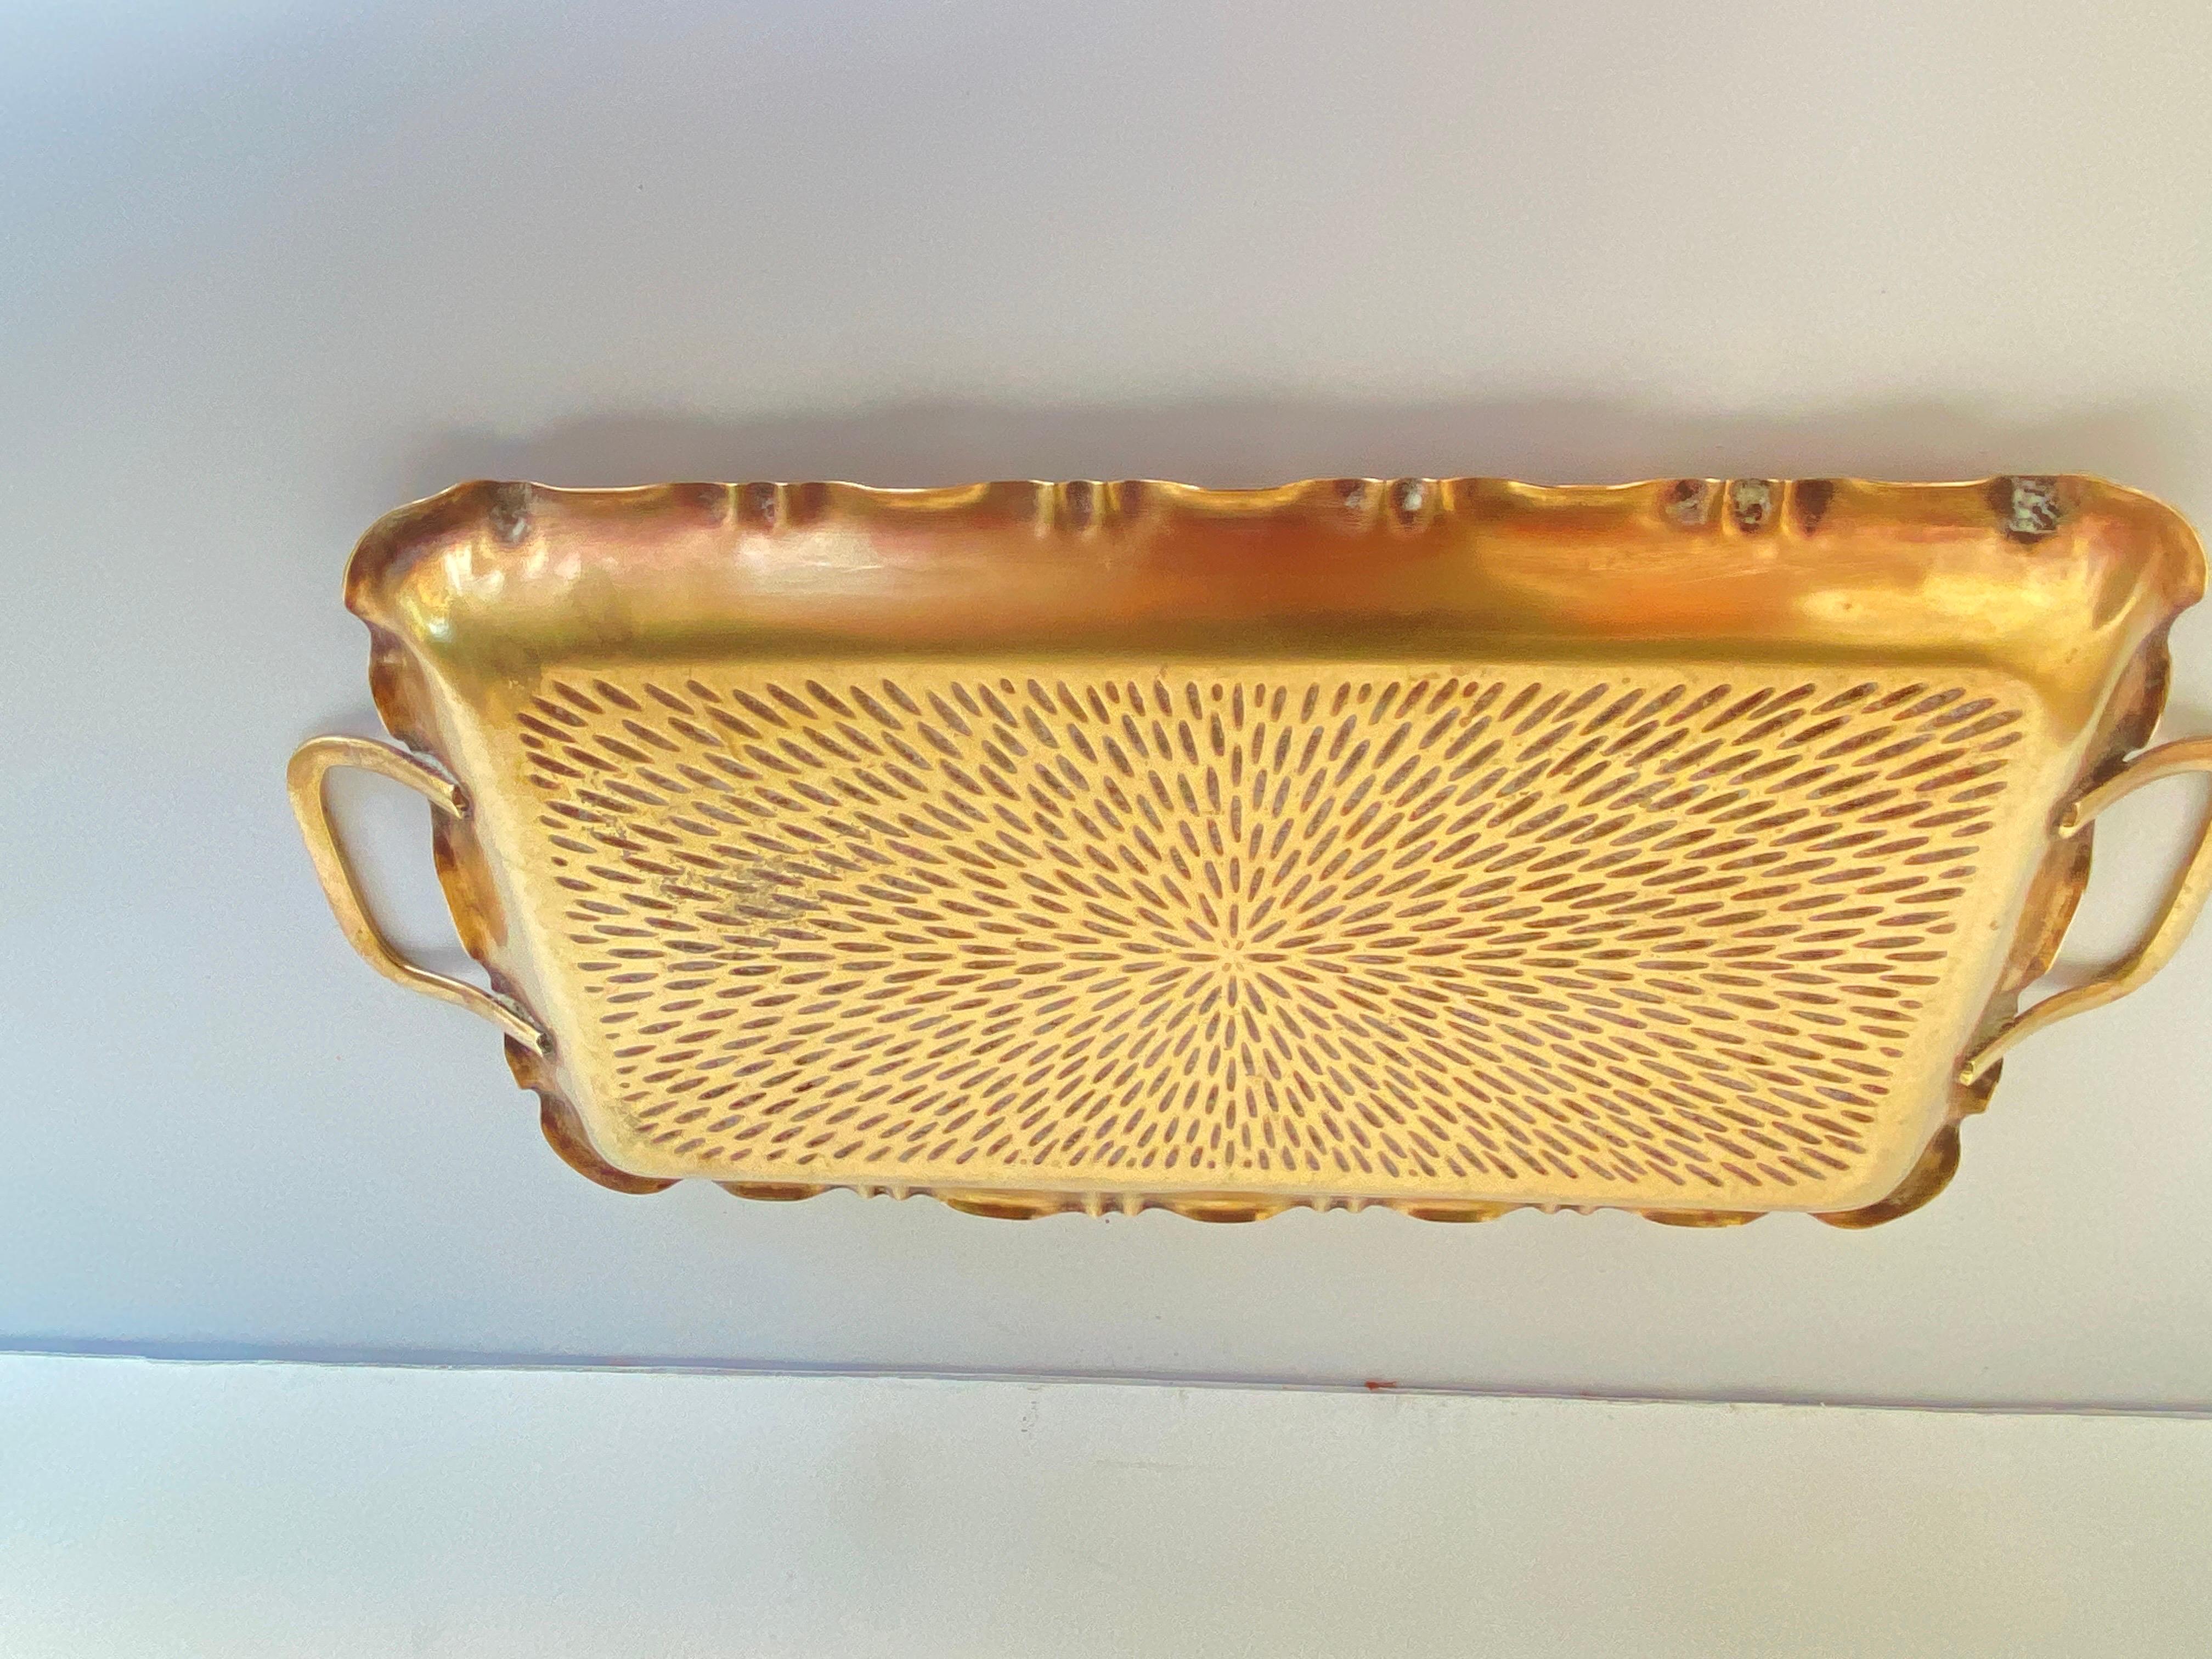 It is a tray from the Art Deco period, in brass with geometric patterns. It is equipped with two handles that allow it to be carried. It was made in France around the 1940s. It is gold in color.